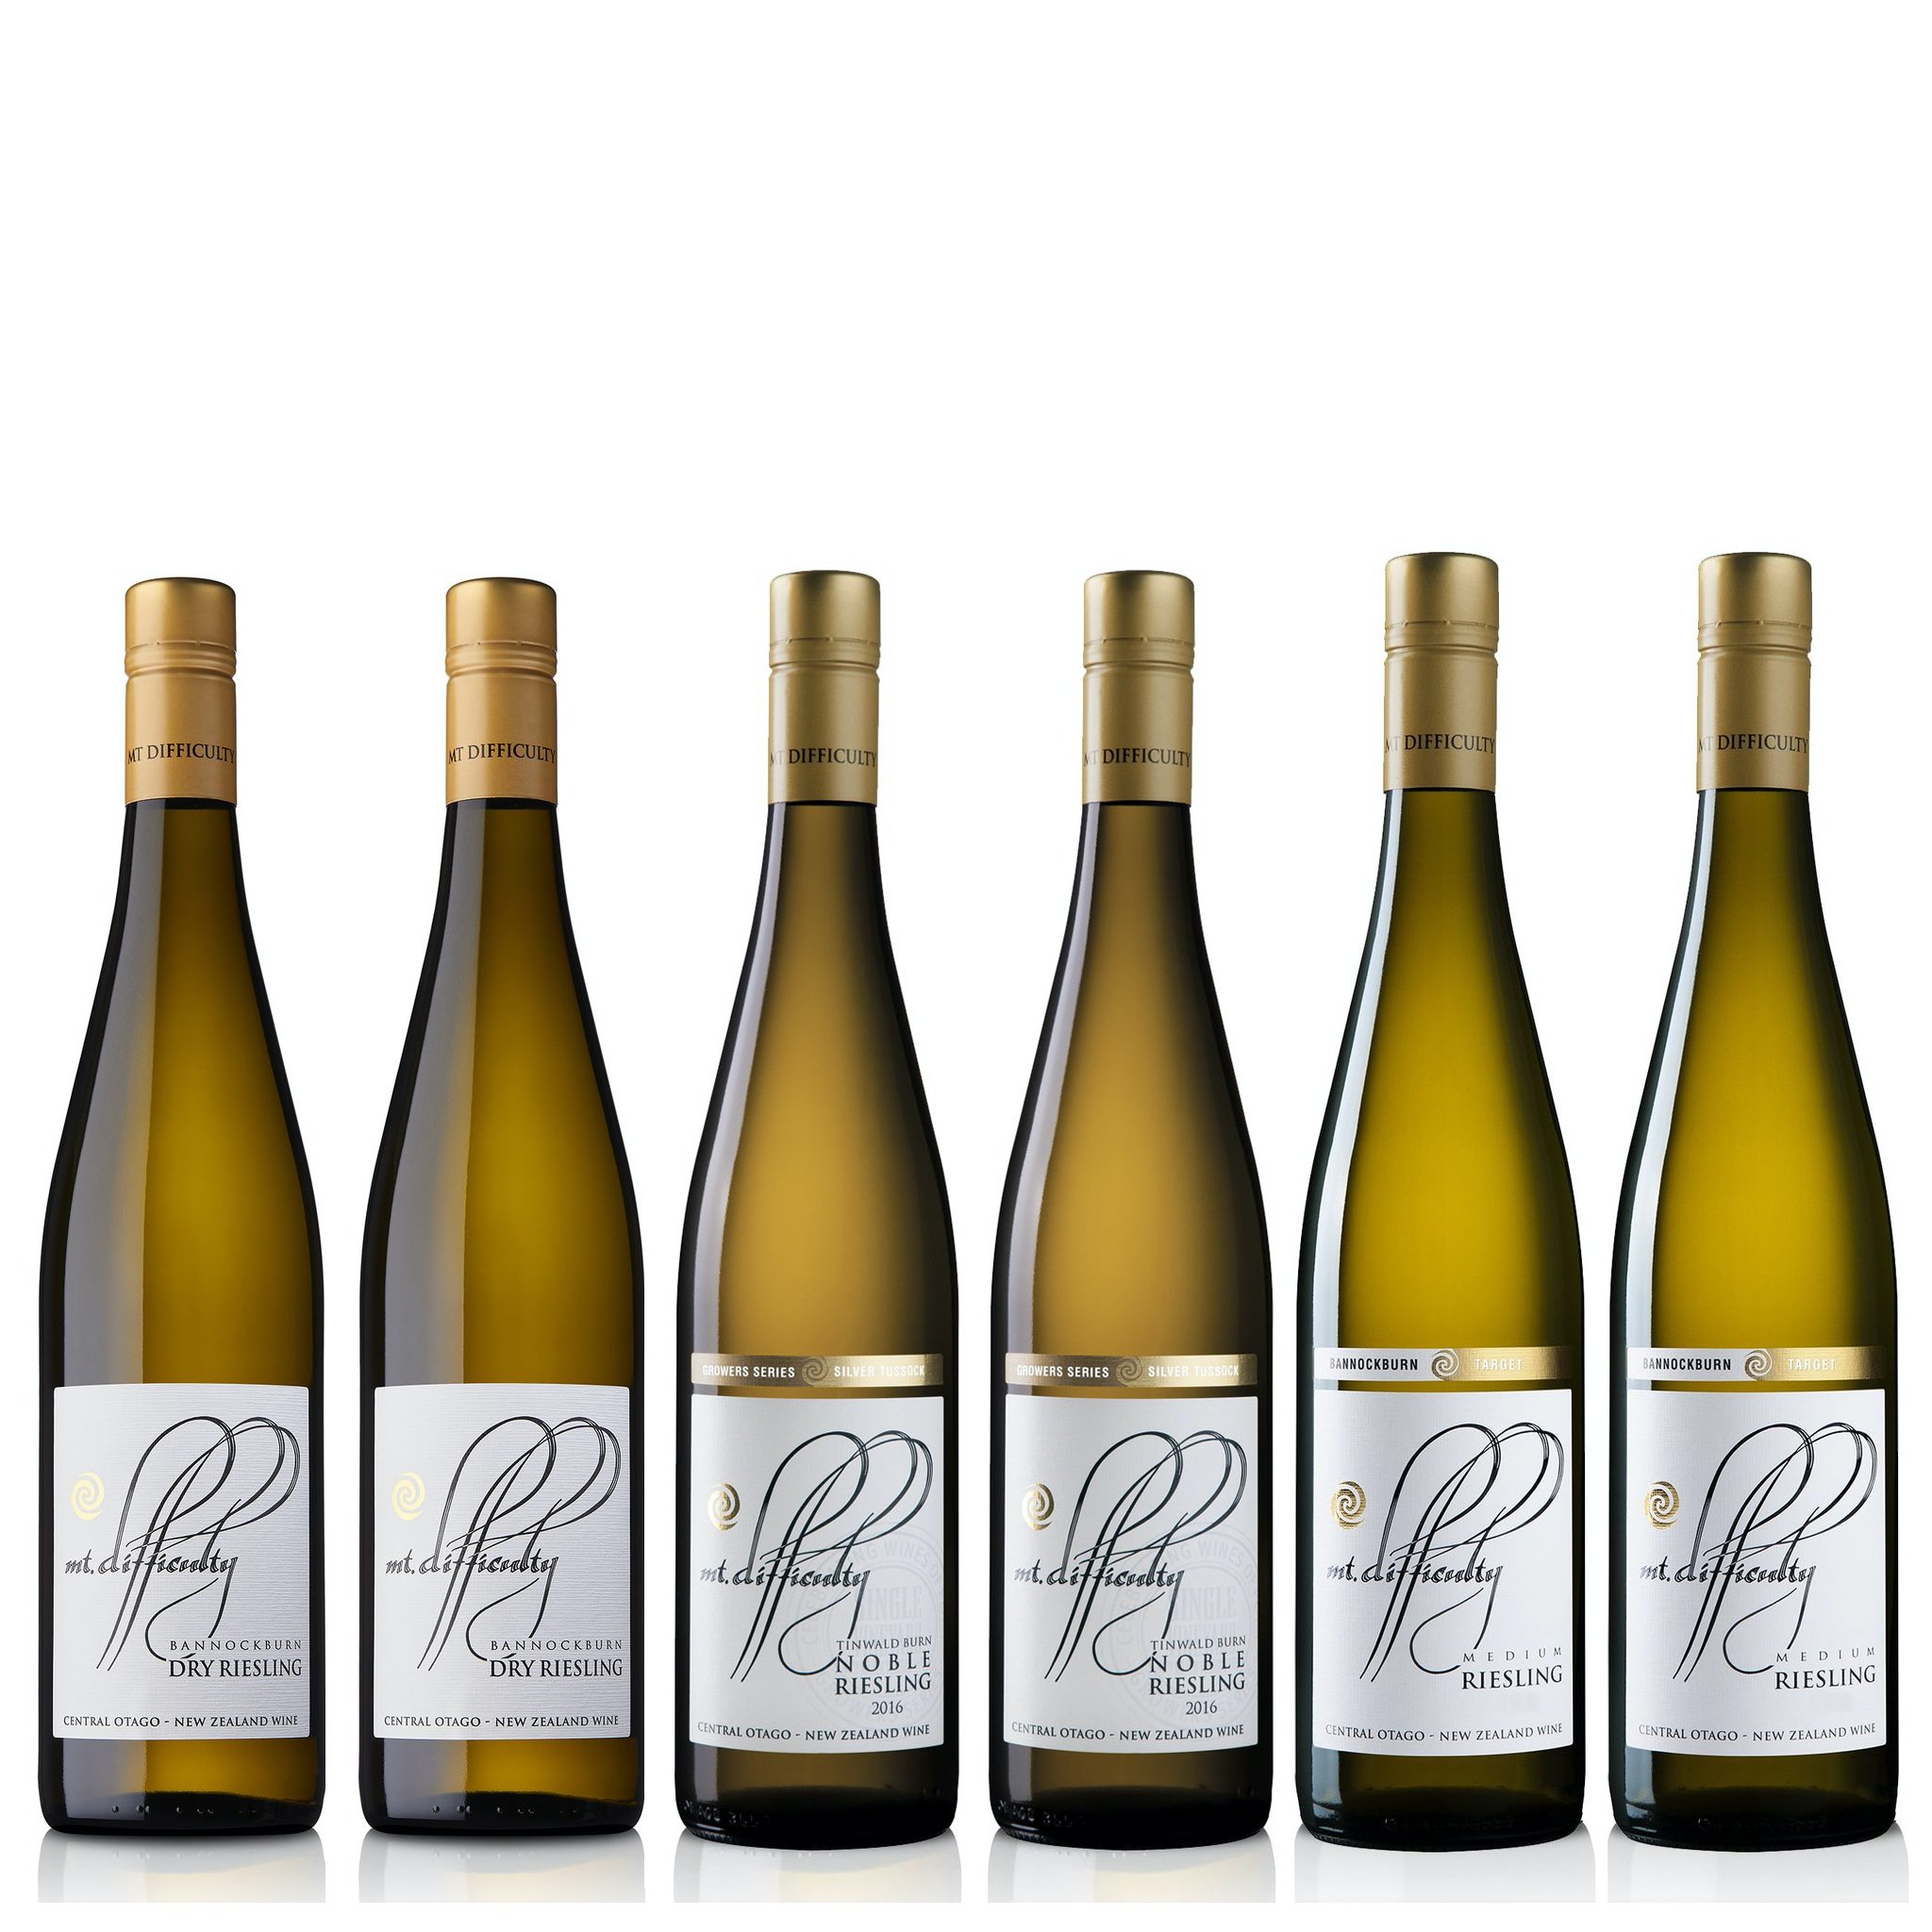 Mt Difficulty Riesling Mixed case 6 bottles in total